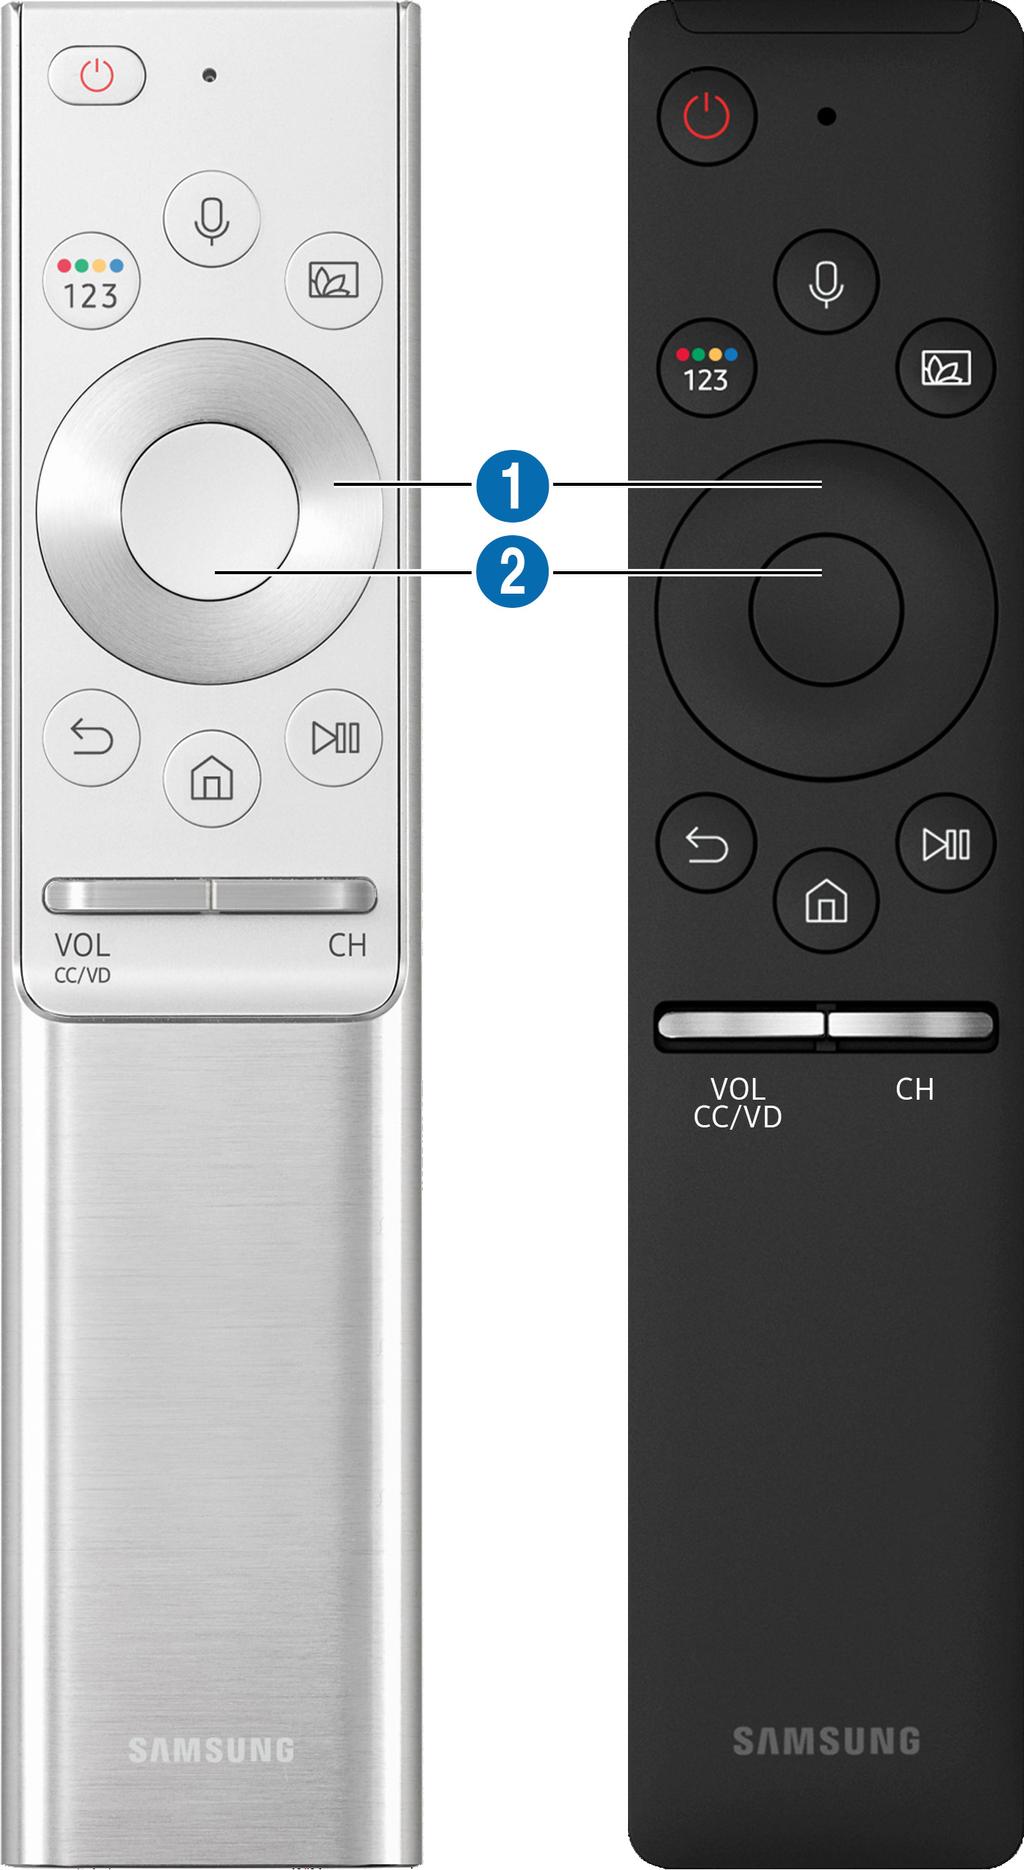 Remote Control and Peripherals You can control TV operations with